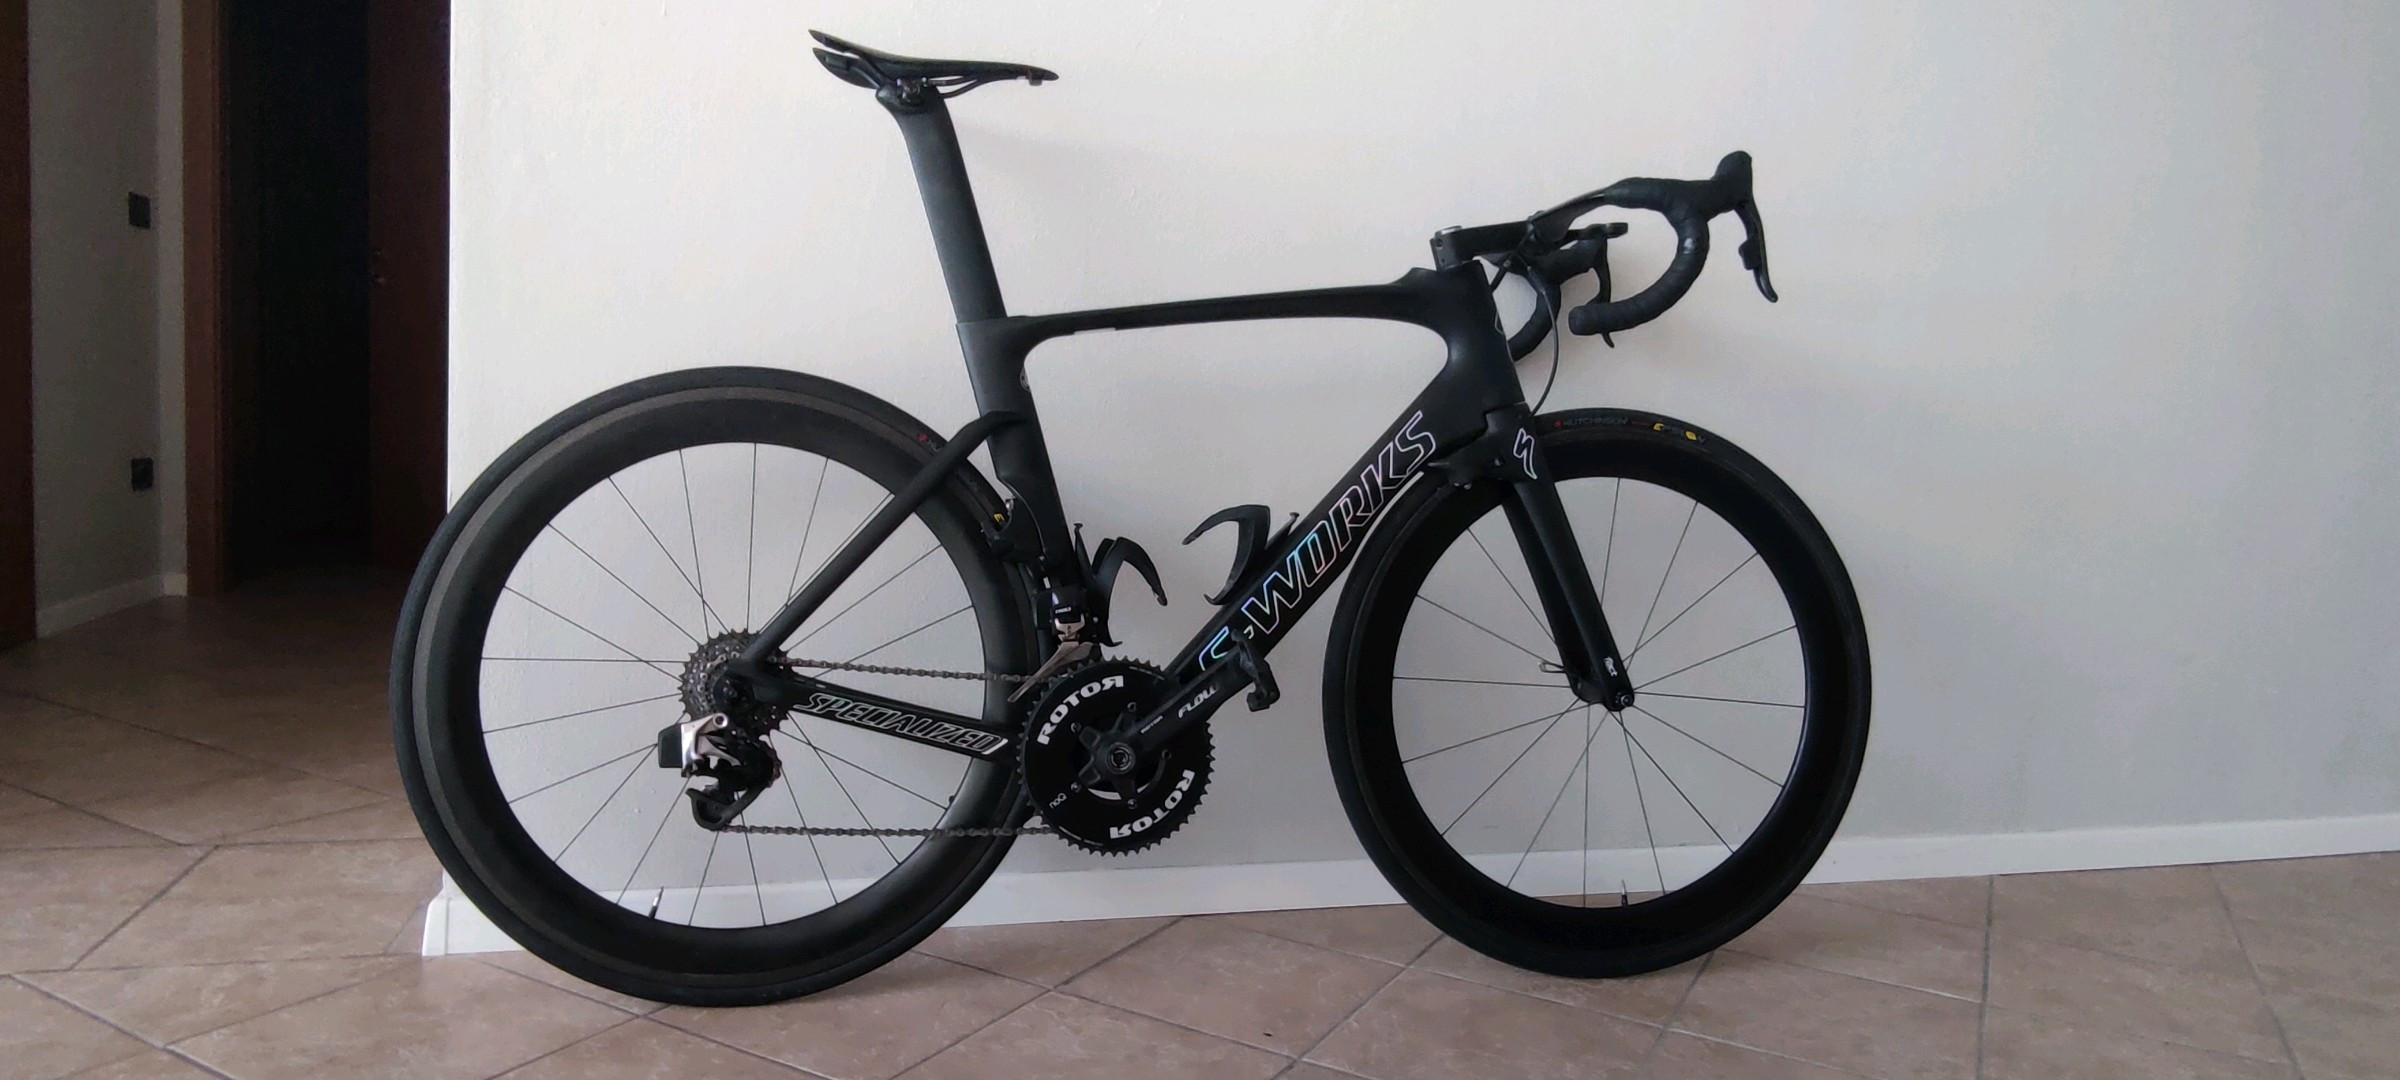 Specialized S Works Venge Vias Di2 Used In L Buycycle